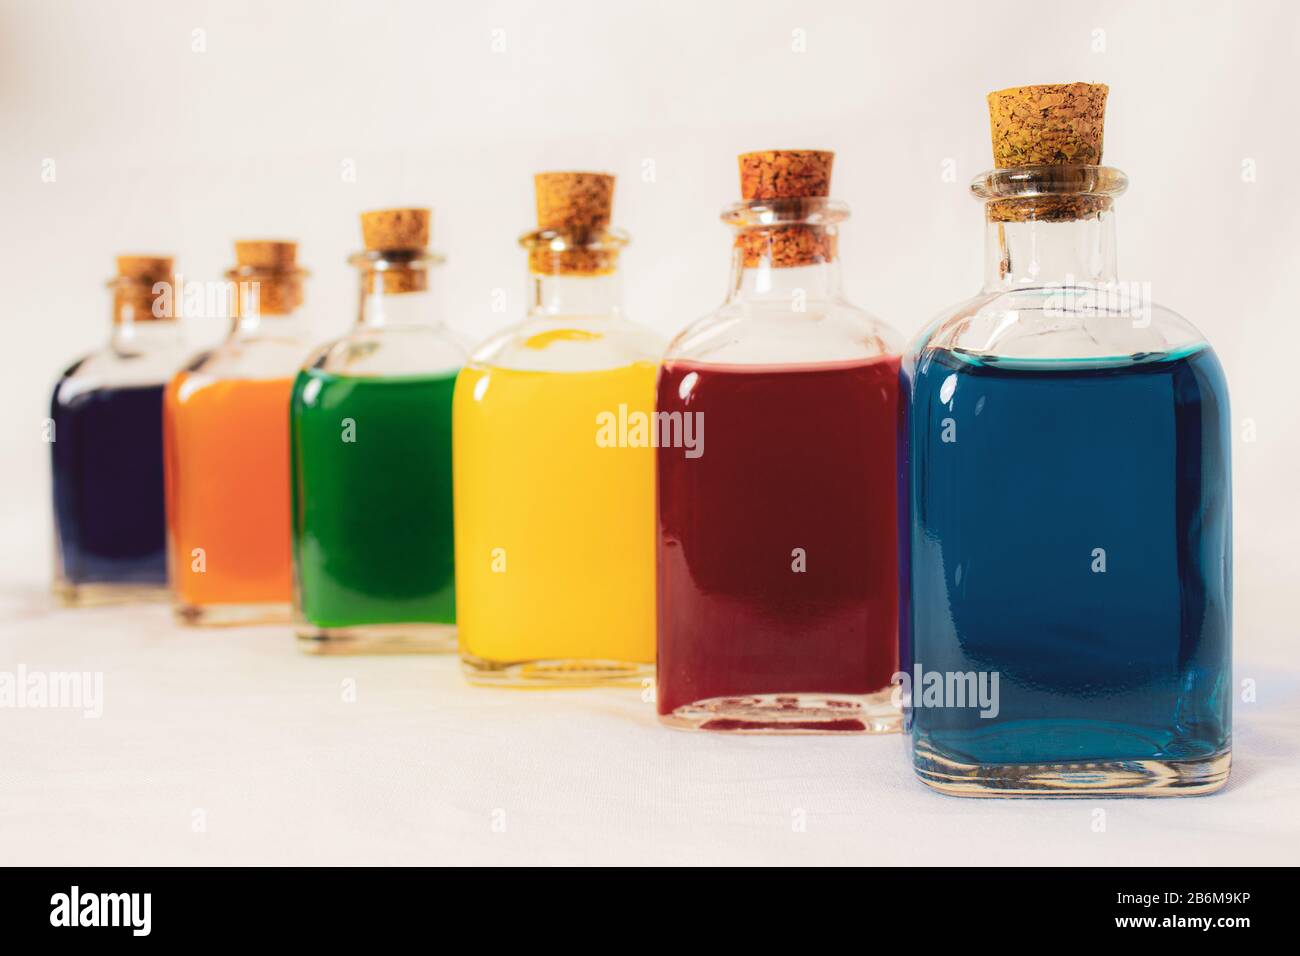 Download Six Glass Bottles In Perspective With Primary And Secondary Colors Blue Red Yellow Green Orange Violet Stock Photo Alamy Yellowimages Mockups